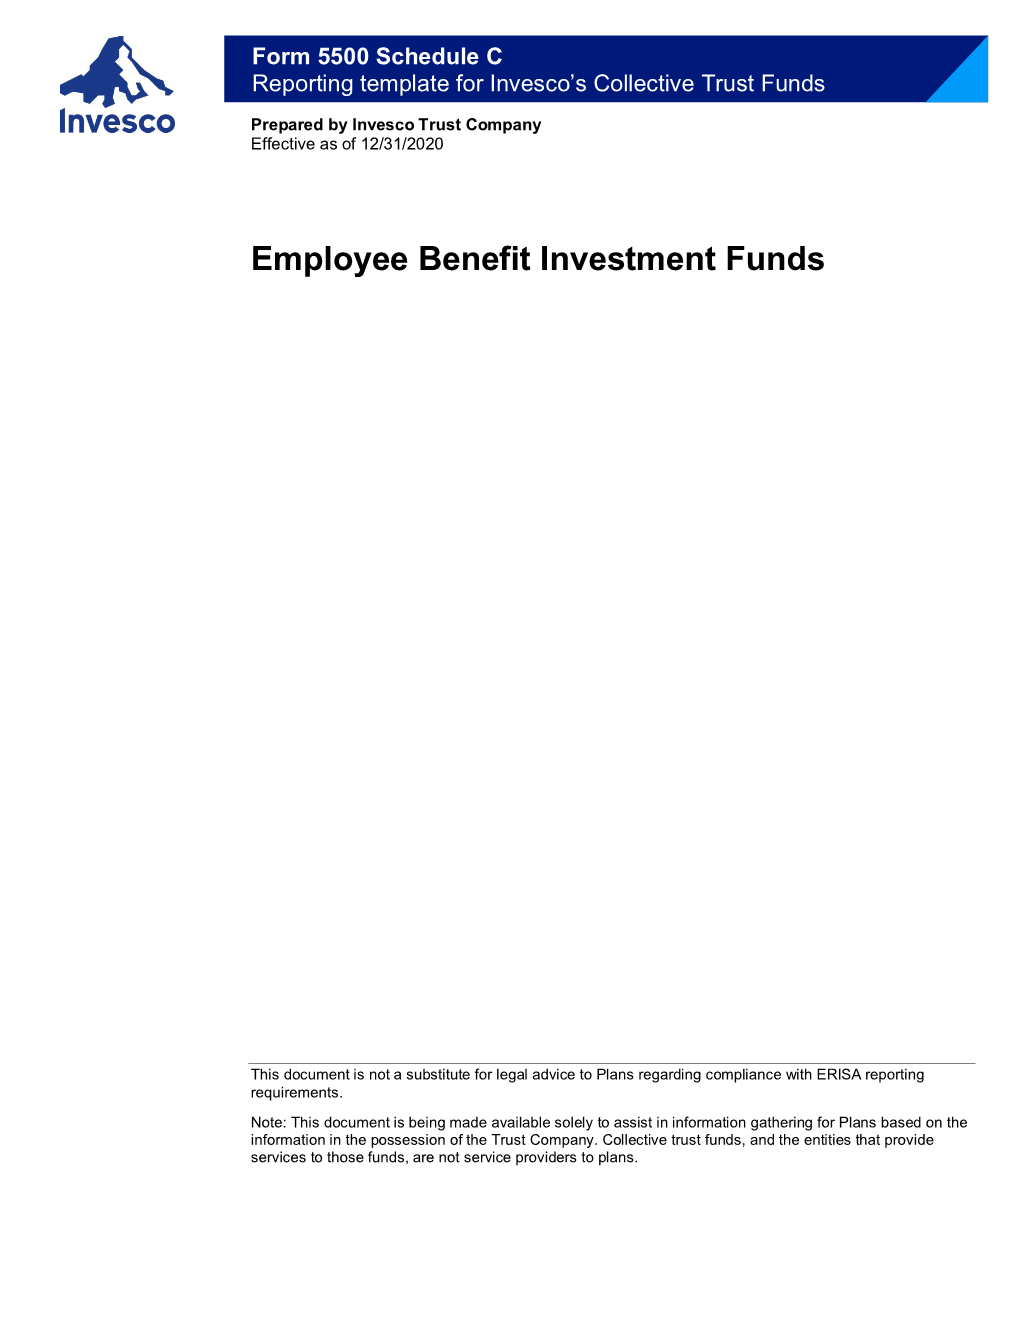 Employee Benefit Investment Funds